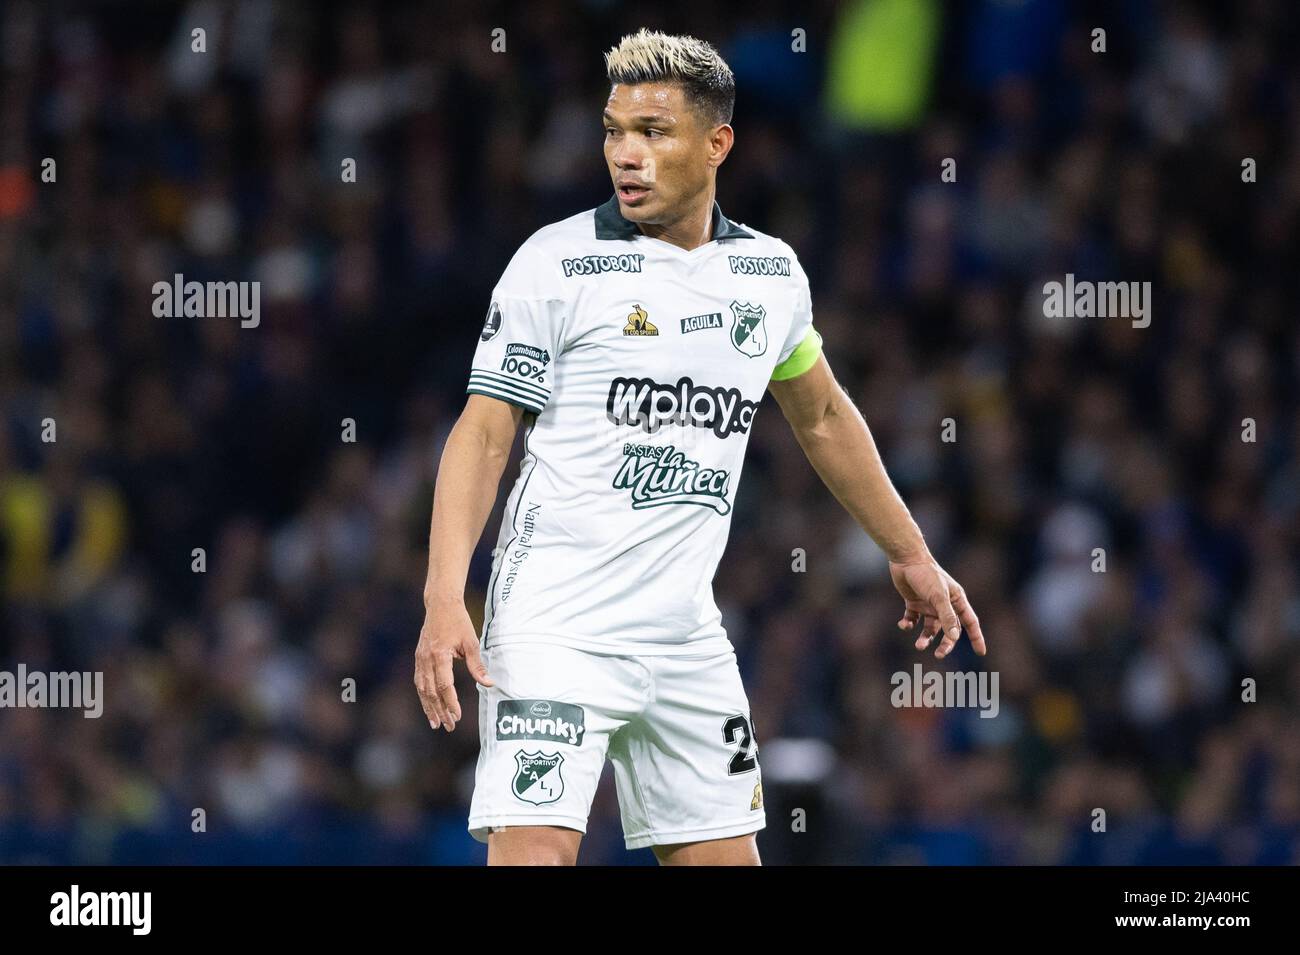 Buenos Aires, Argentina. 26th May, 2022. Teofilo Gutierrez of Deportivo Cali looks on during the Copa CONMEBOL Libertadores 2022 match between Boca Juniors and Deportivo Cali at Estadio Alberto J. Armando.(Final score; Boca Juniors 1:0 Deportivo Cali) Credit: SOPA Images Limited/Alamy Live News Stock Photo